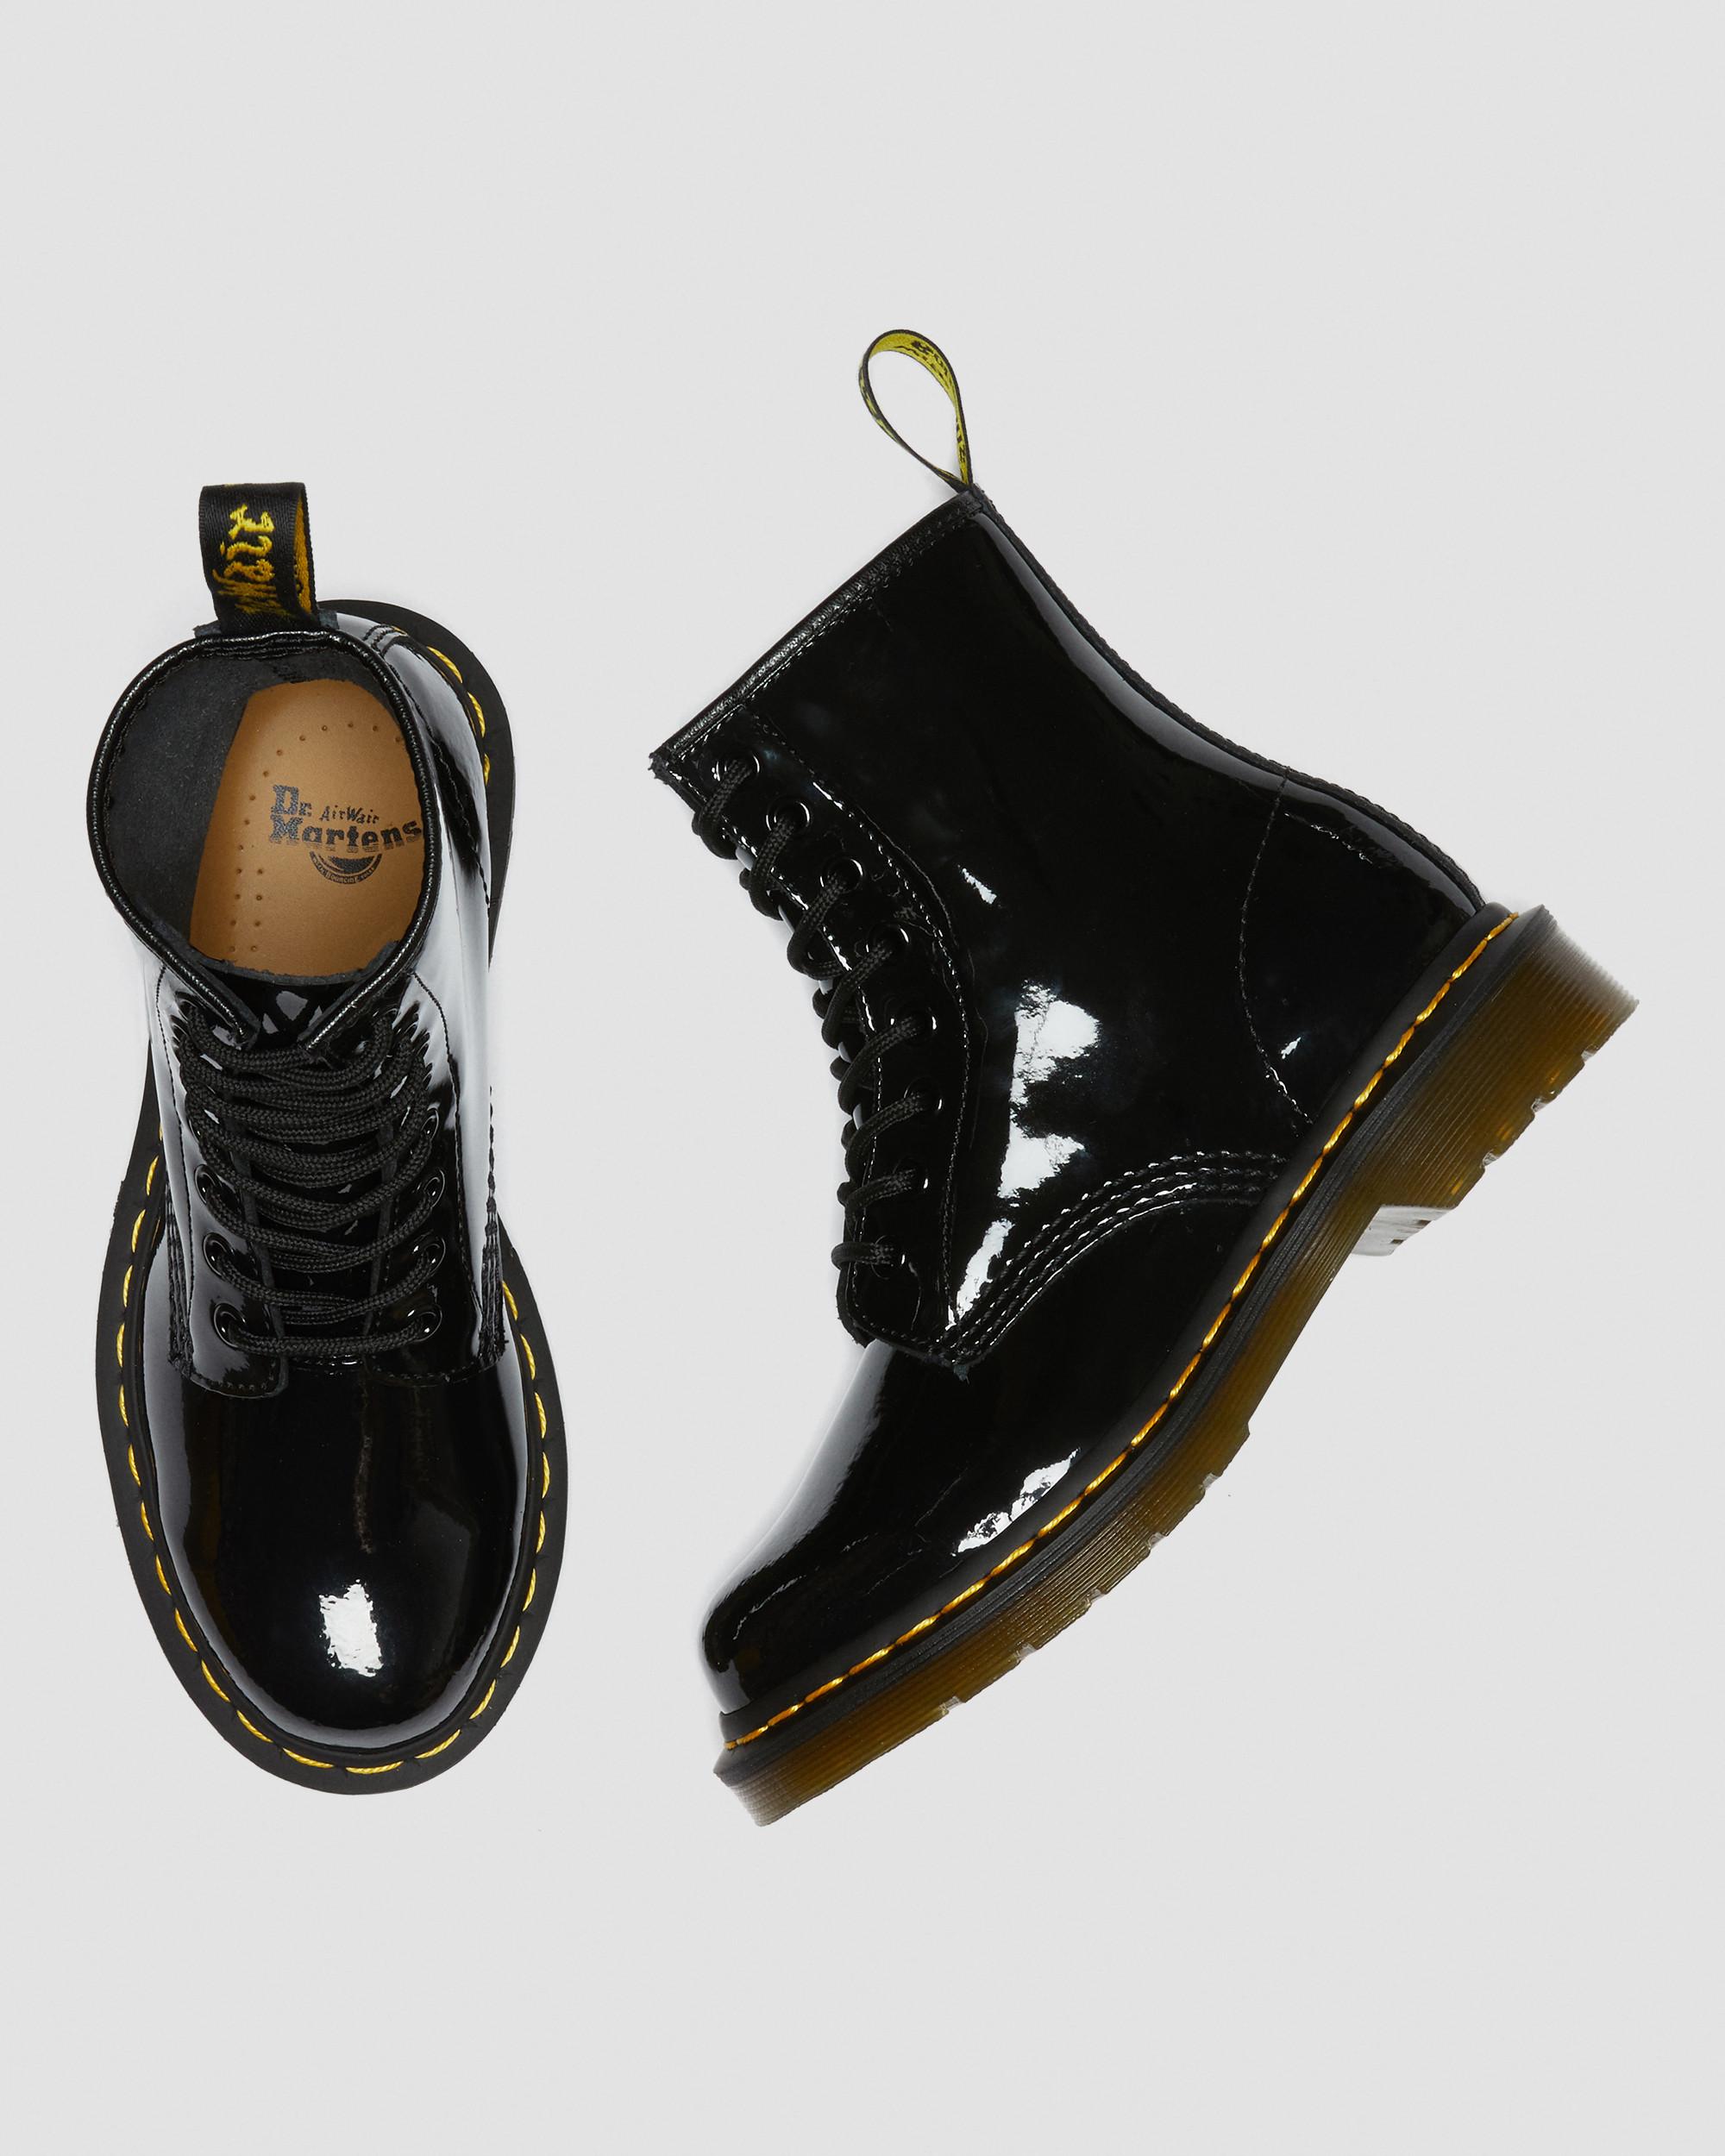 1460 Patent Leather Lace Up Boots in Black